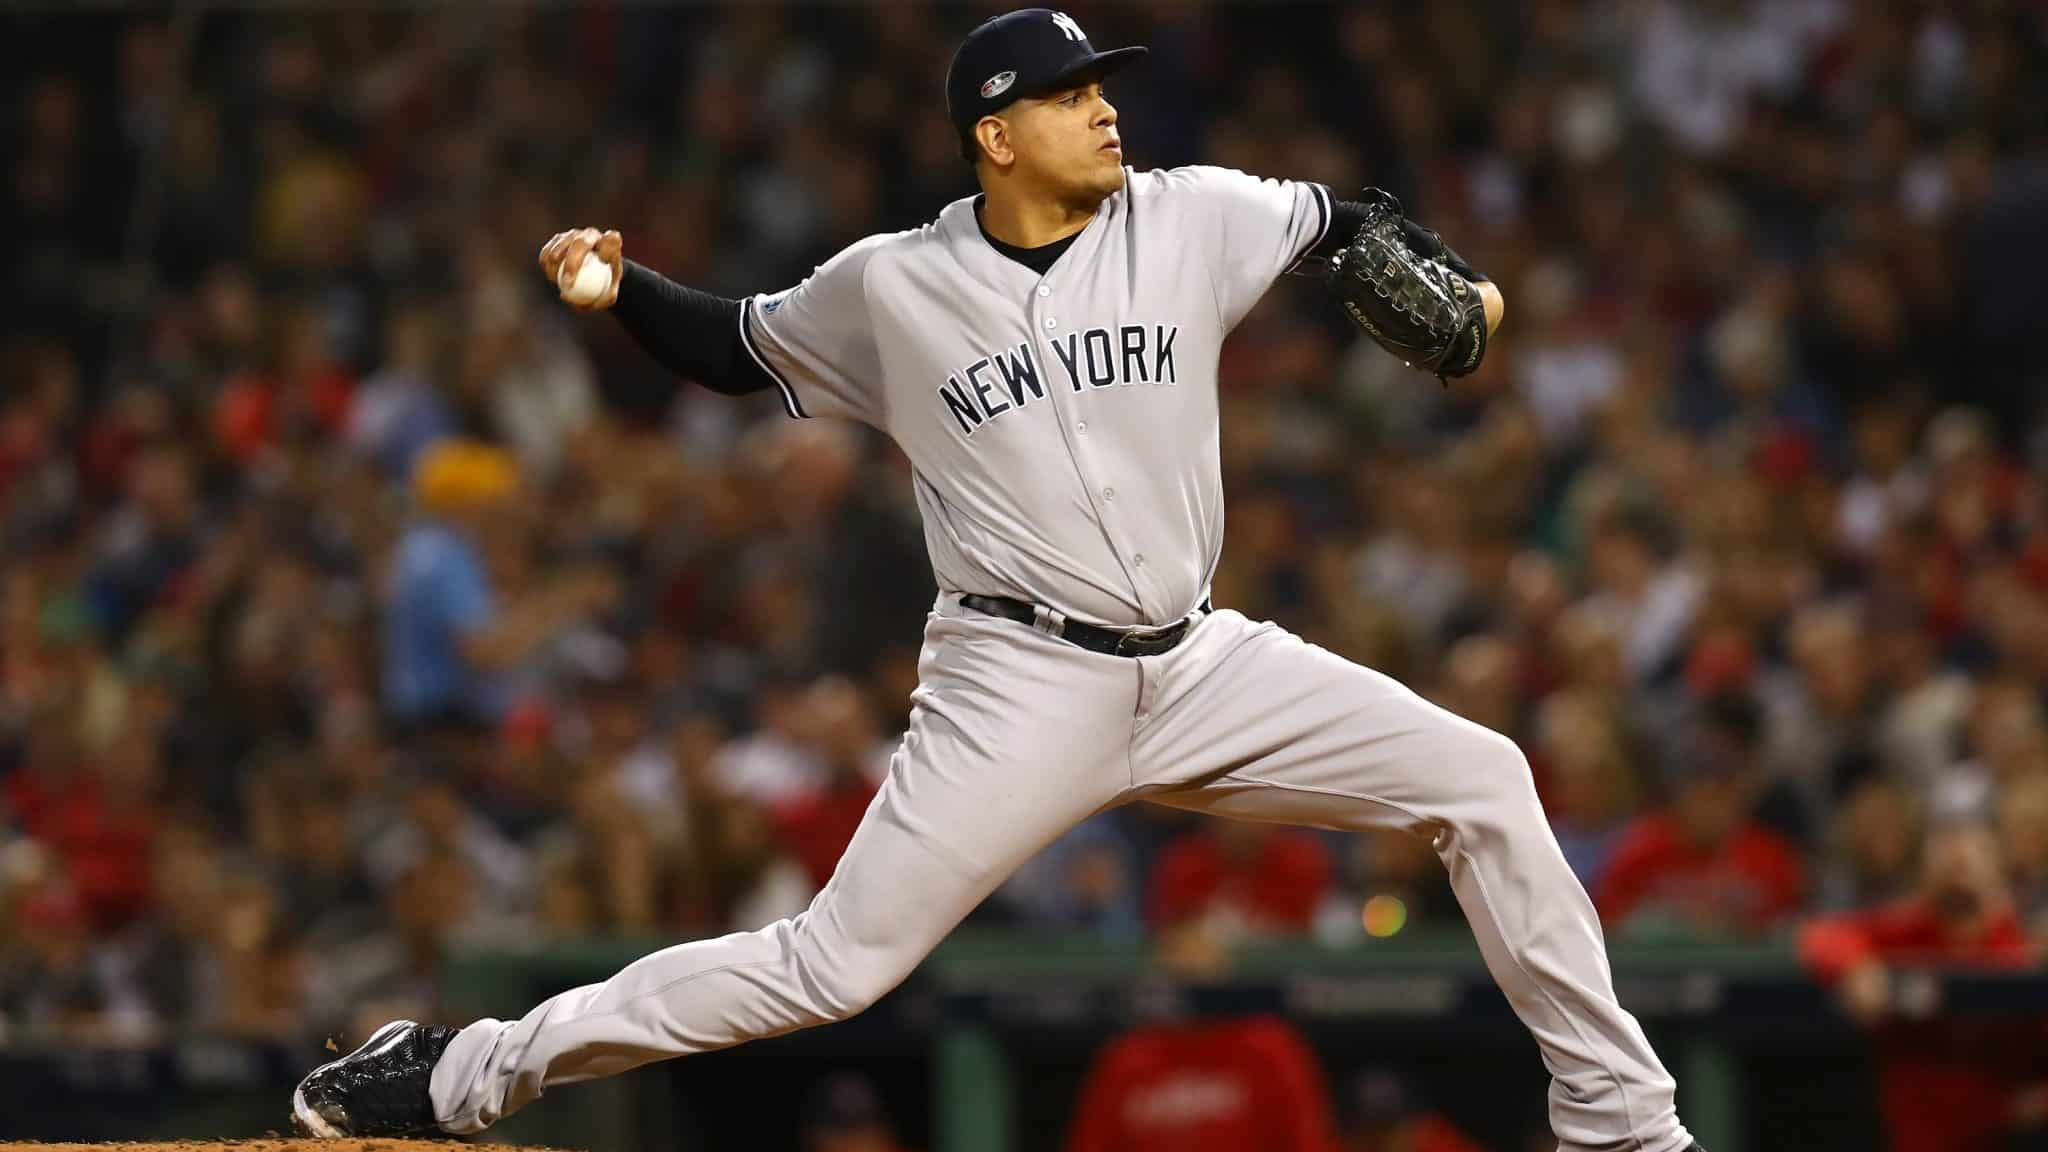 BOSTON, MA - OCTOBER 06: Pitcher Dellin Betances #68 of the New York Yankees pitches during the sixth inning of Game Two of the American League Division Series against the Boston Red Sox at Fenway Park on October 6, 2018 in Boston, Massachusetts.